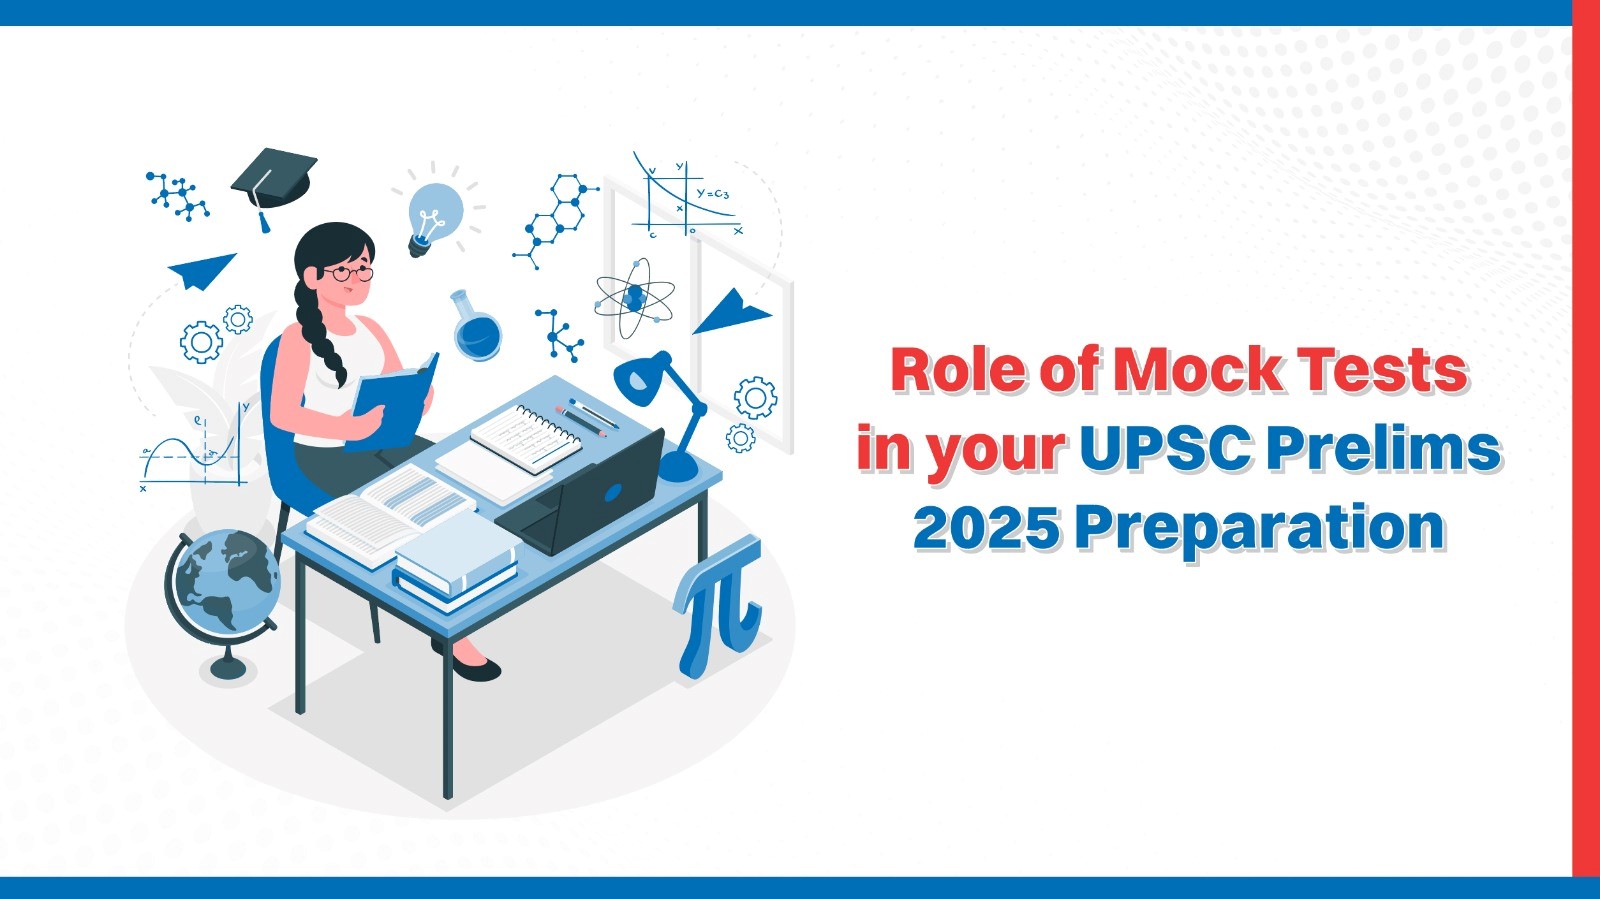 Role of Mock Tests in your UPSC Prelims 2025 Preparation